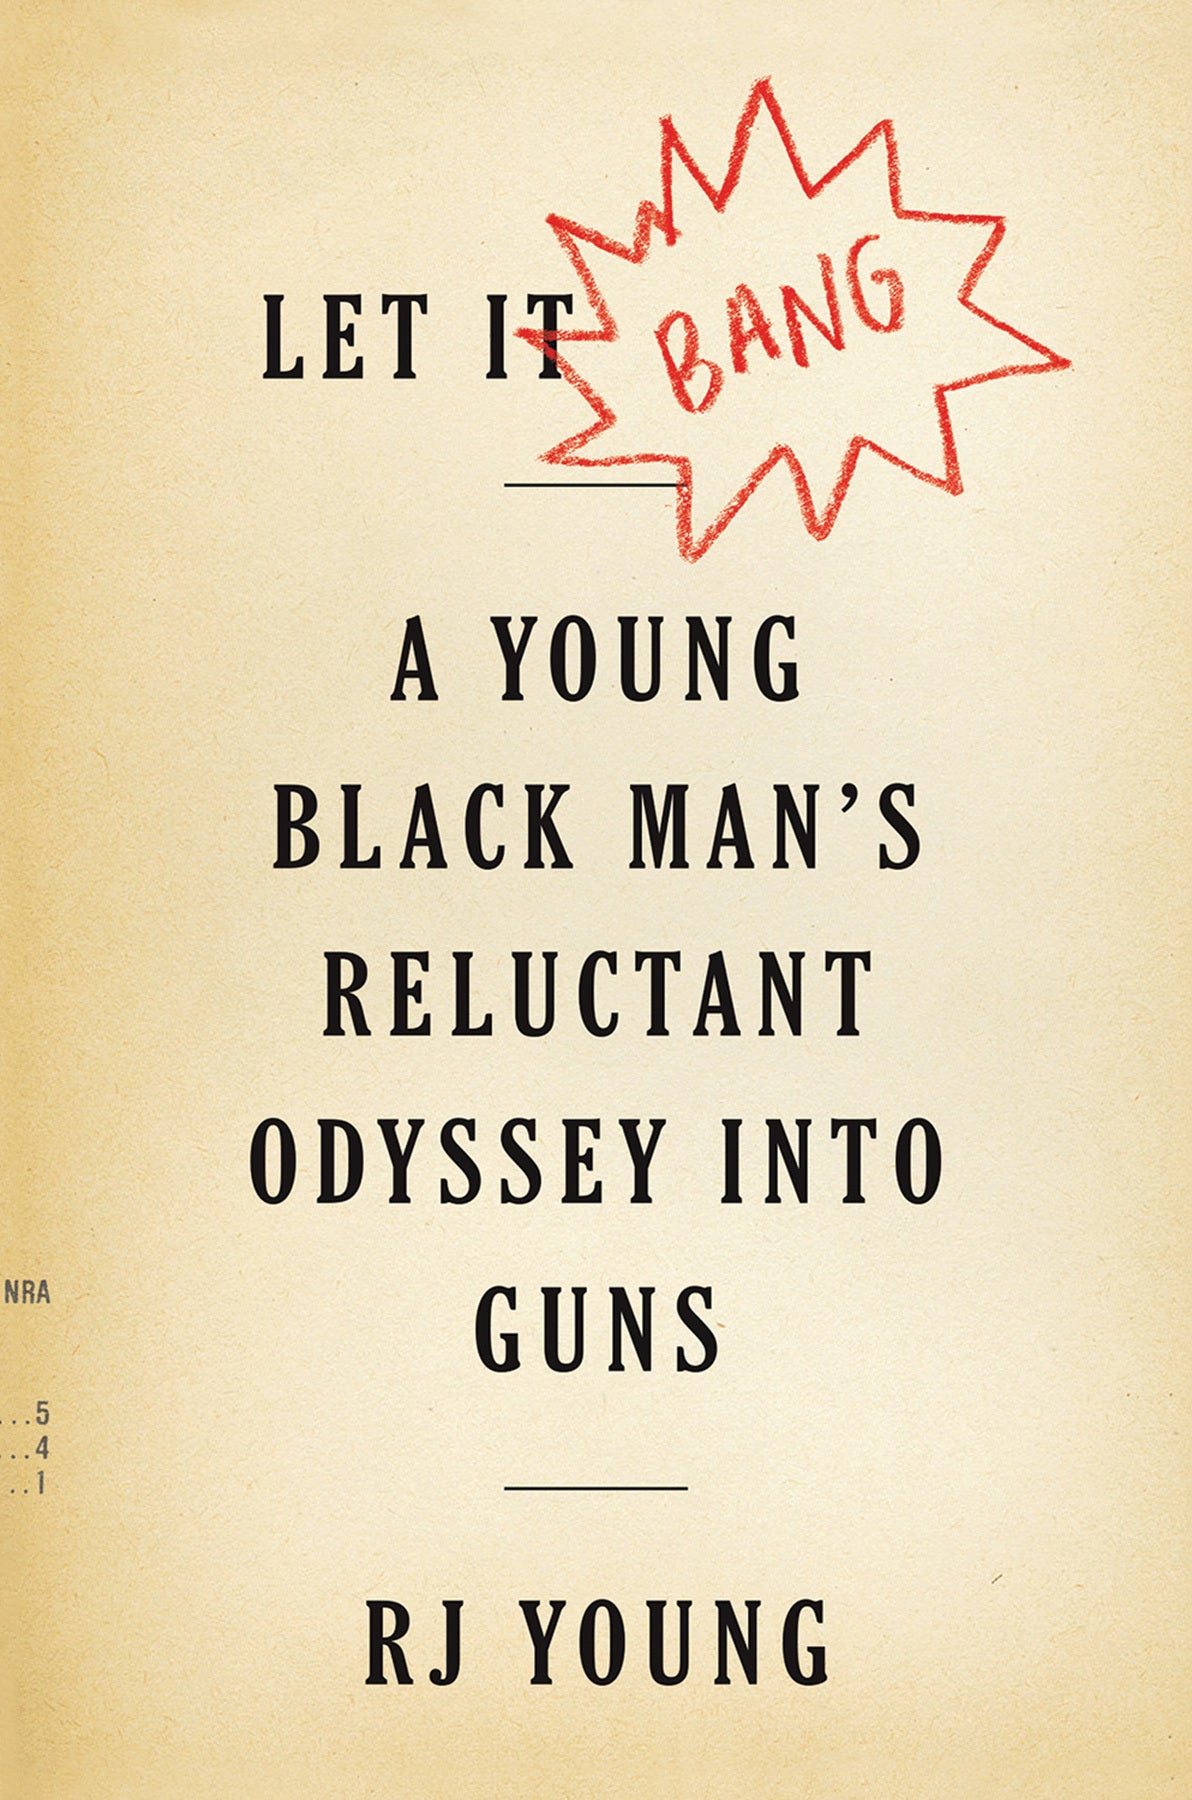 Let it Bang: A Young Black Man's Reluctant Odyssey Into Guns;  RJ Young